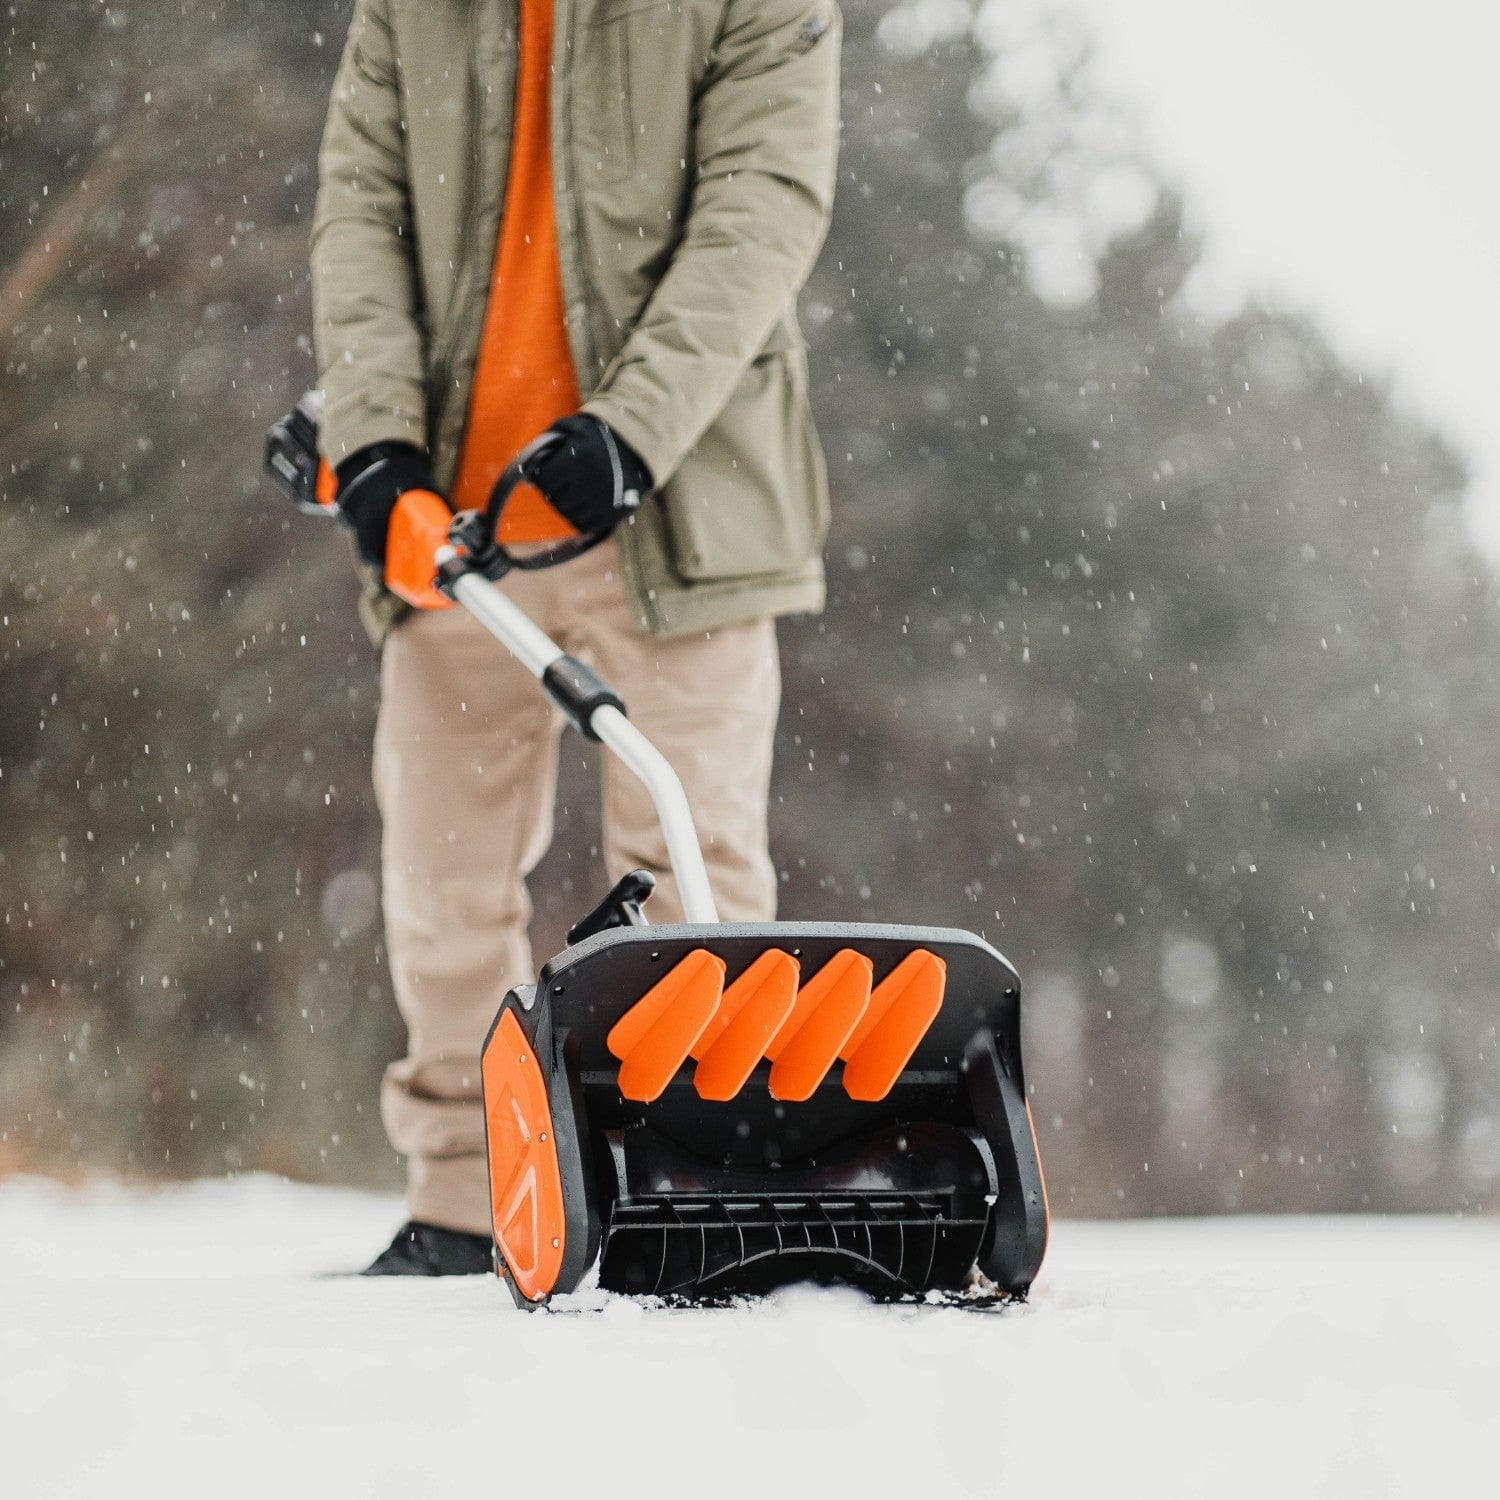 SuperHandy Electric Snow Thrower Pro - 17" Width, 23' Throw, 48V-2Ah Battery